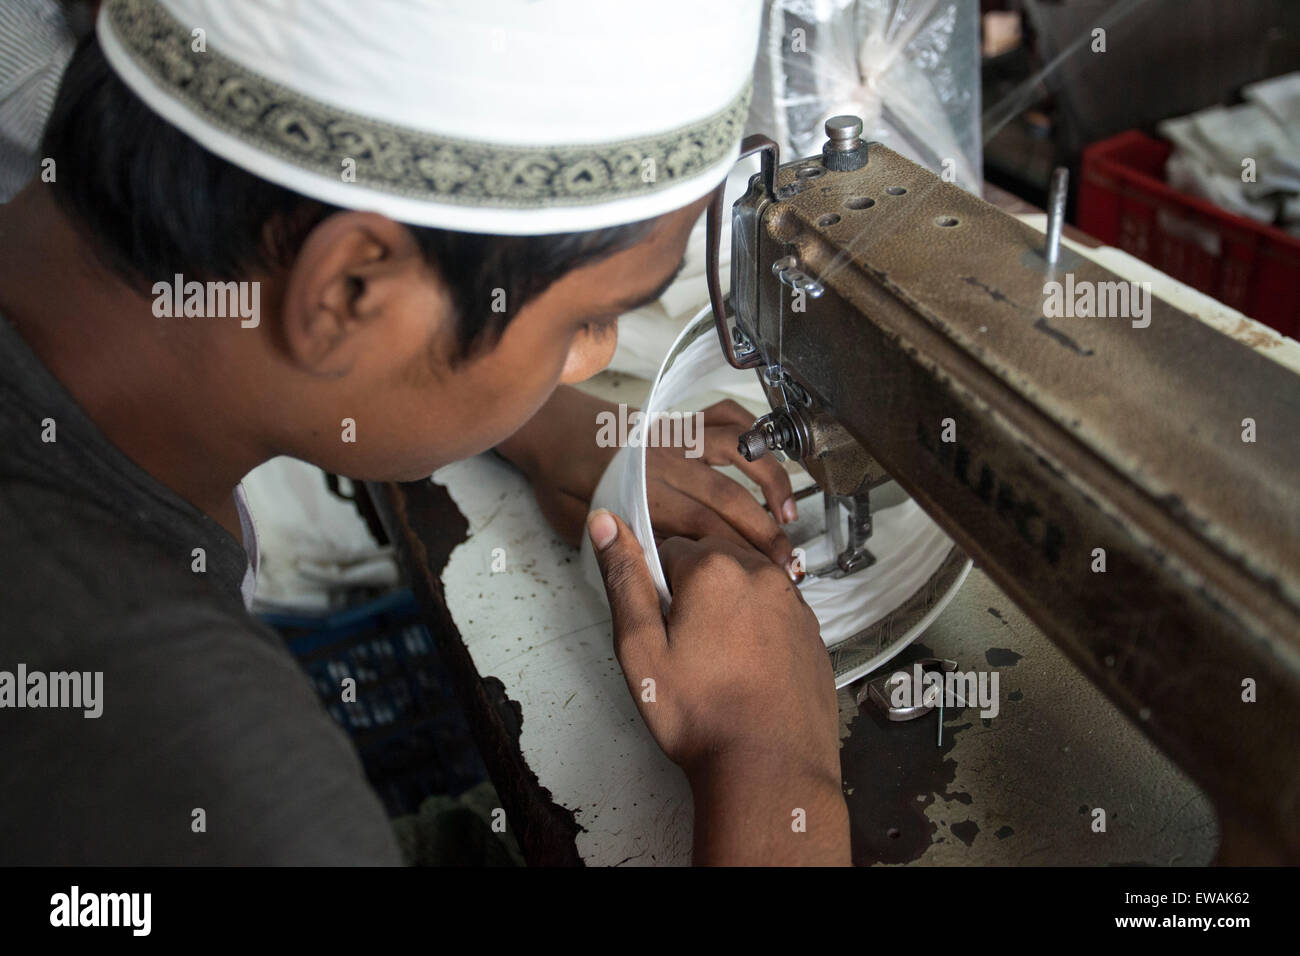 DHAKA, BANGLADESH 21st June : worker is busy at a factory in old Dhaka to making Tupi or prayer hats during holy Ramadan in Dhaka on 21st June 2015. There is a great demand for locally made prayer caps both at home and abroad. About 60 percent of all tupis manufactured are exported to countries like Pakistan, Saudi Arabia, India, and other muslim countries. The rest is supplied to the domestic market.The livelihood of nearly three thousand craftsmen who make prayer caps (tupi) hang in the balance as around a hundred tupi factories in the old part of the city Dhaka. Stock Photo